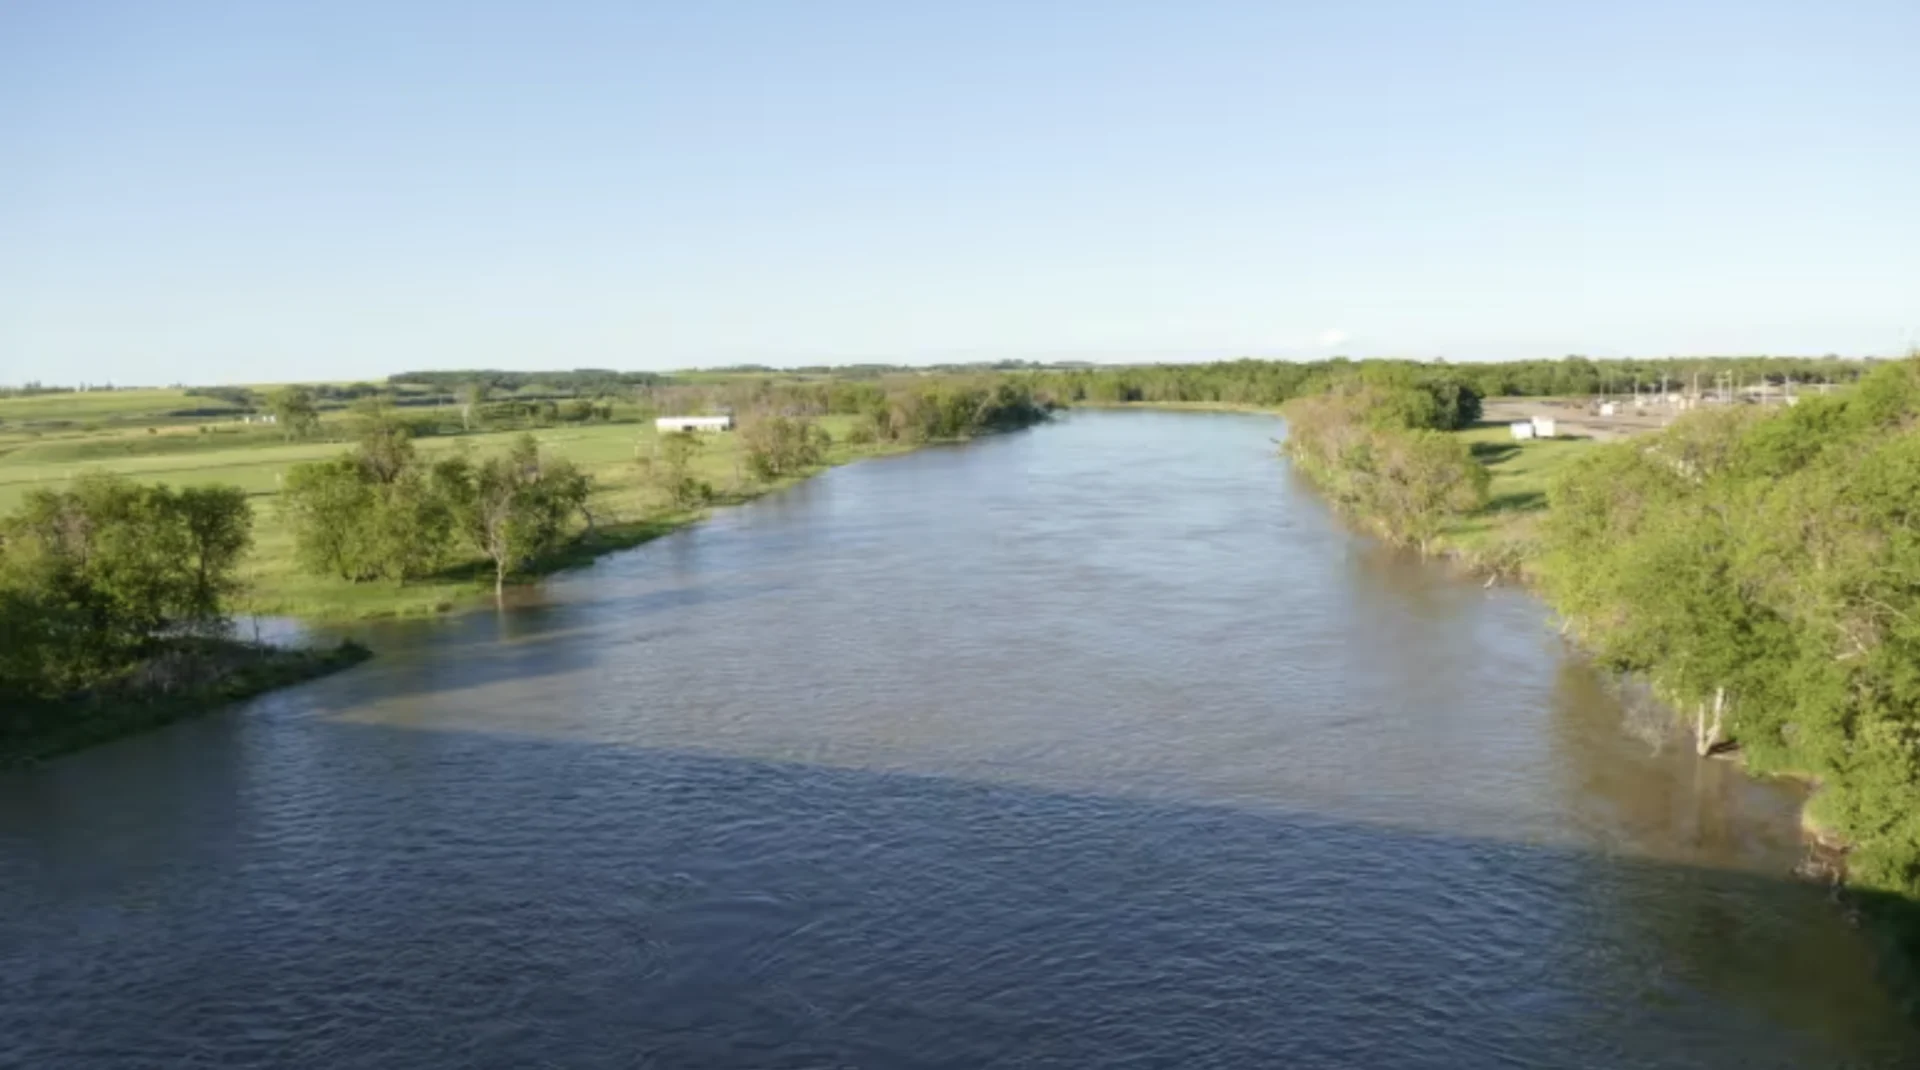 CBC: The Assiniboine River in Brandon, Man., is seen in a file image. A stretch of the river, between the Shellmouth Dam and the city, is under a flood warning. (Riley Laychuk/CBC)